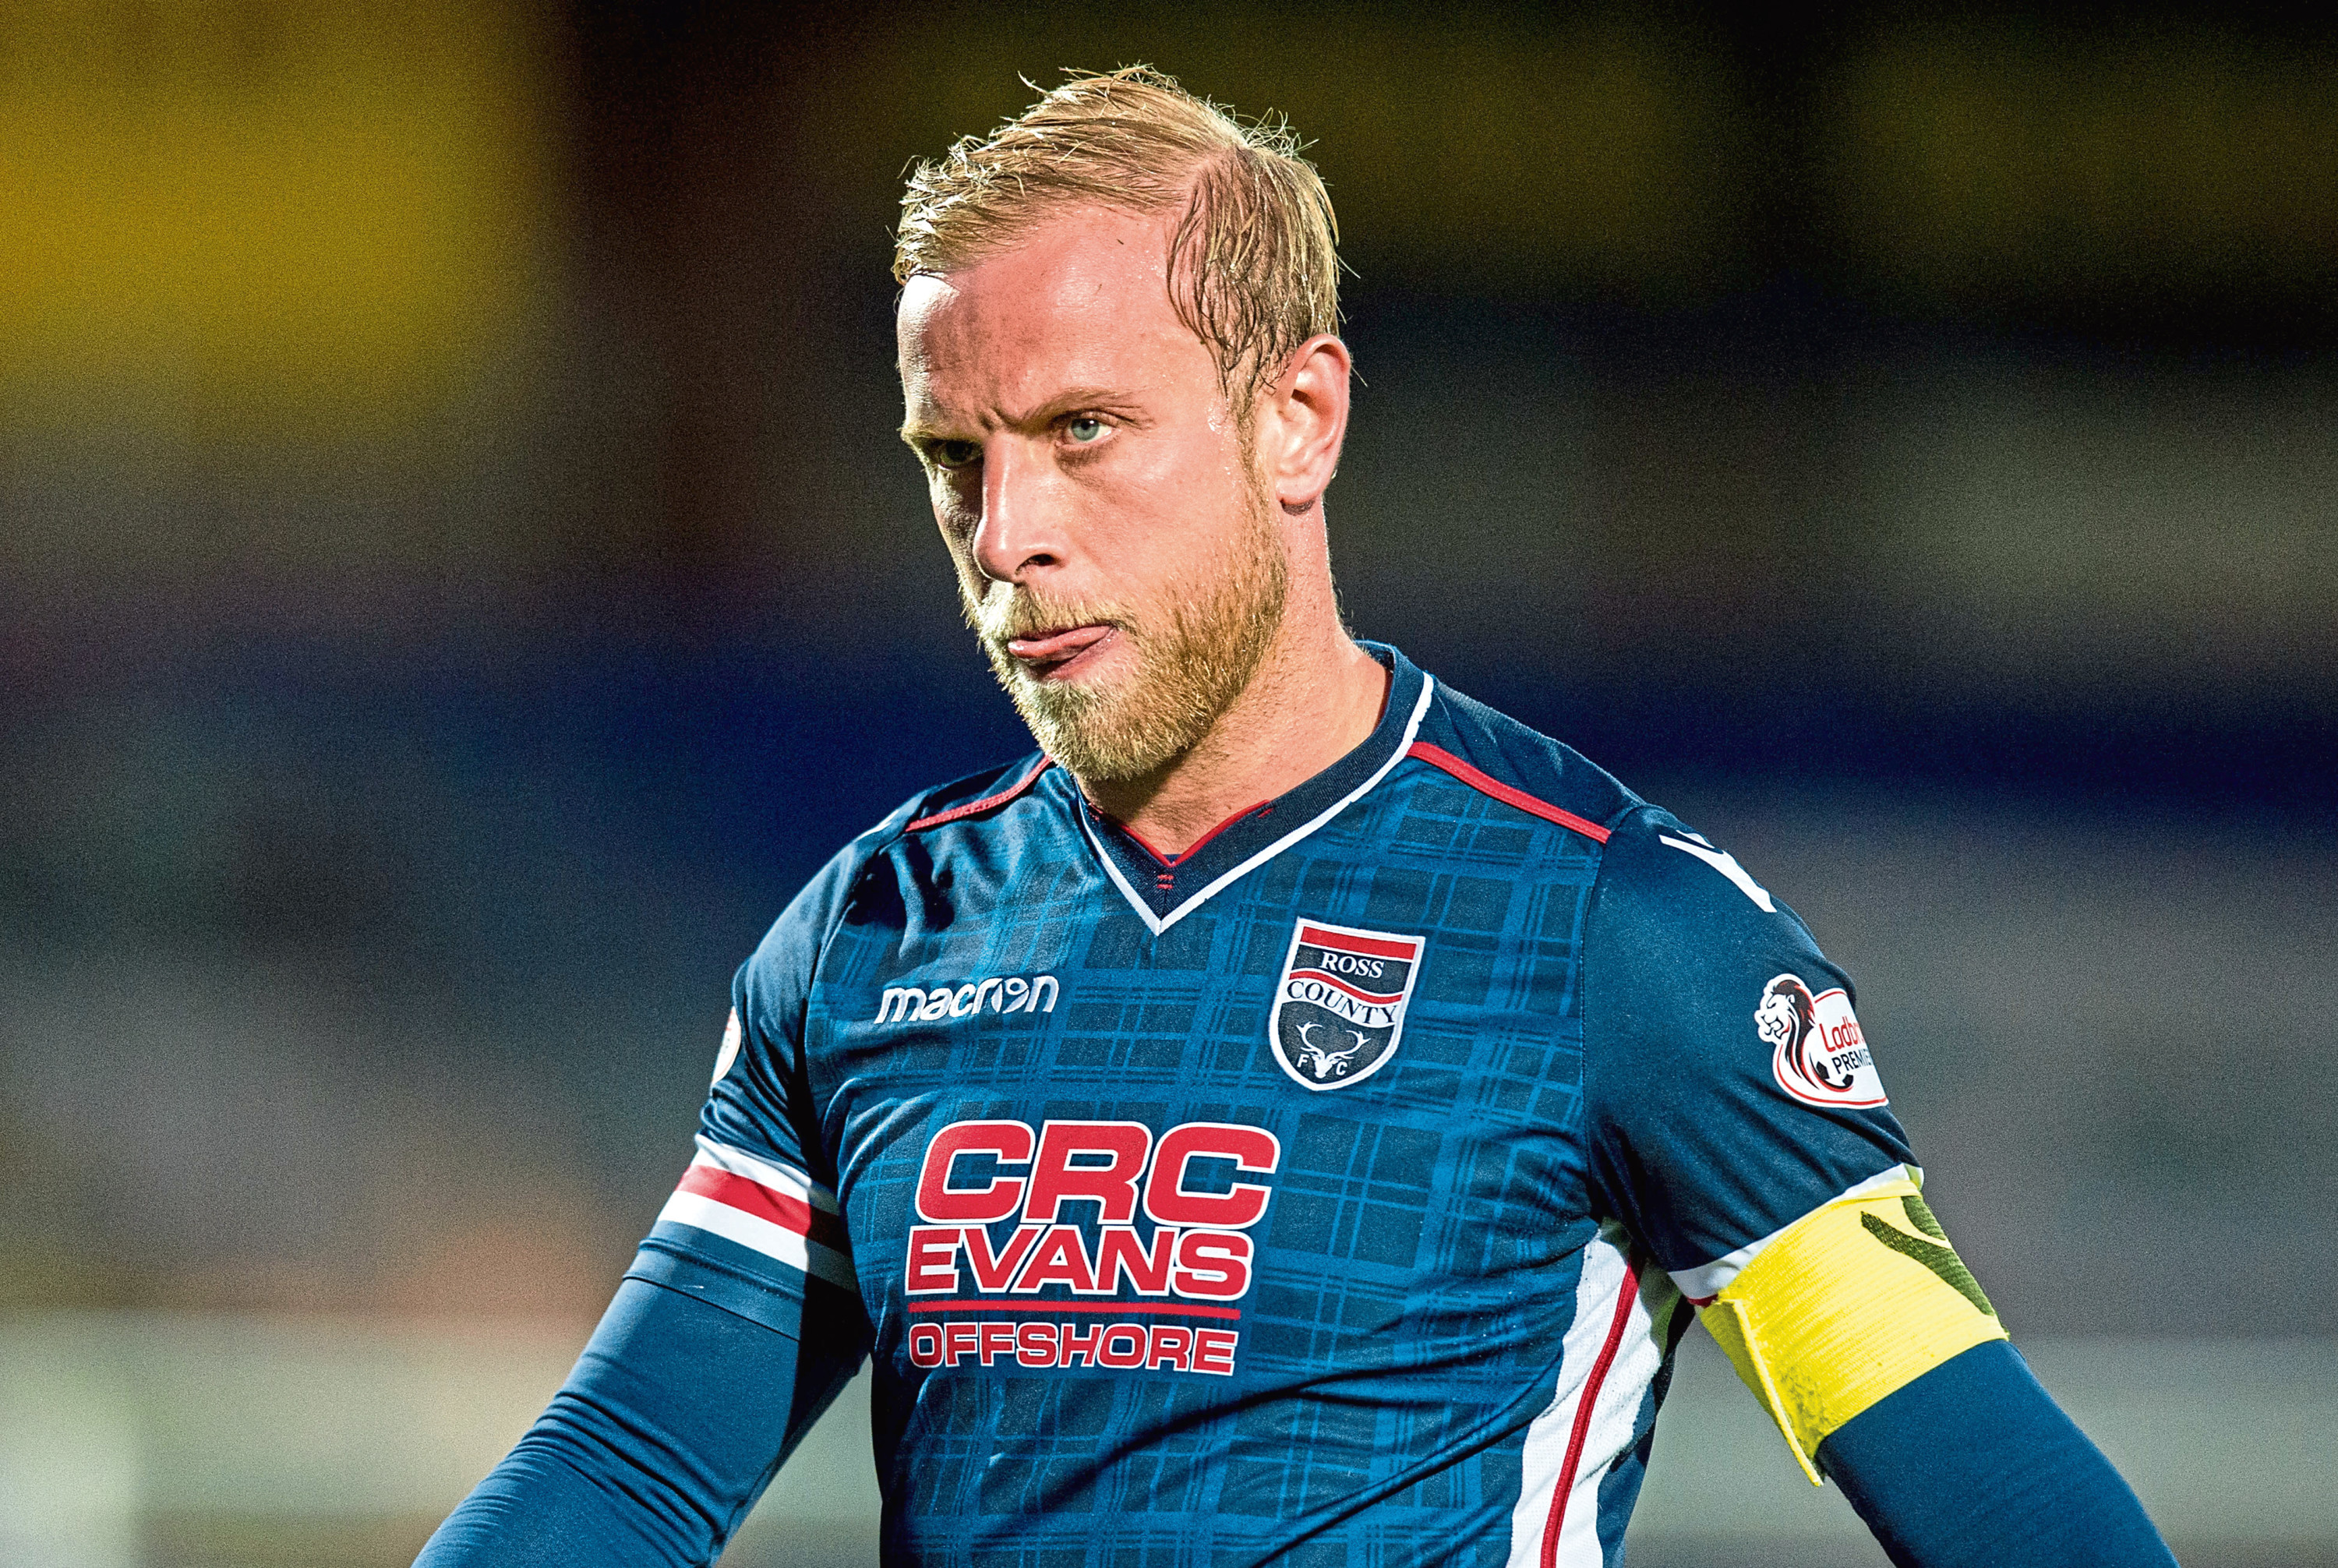 Ross County captain Andrew Davies has joined Hartlepool United